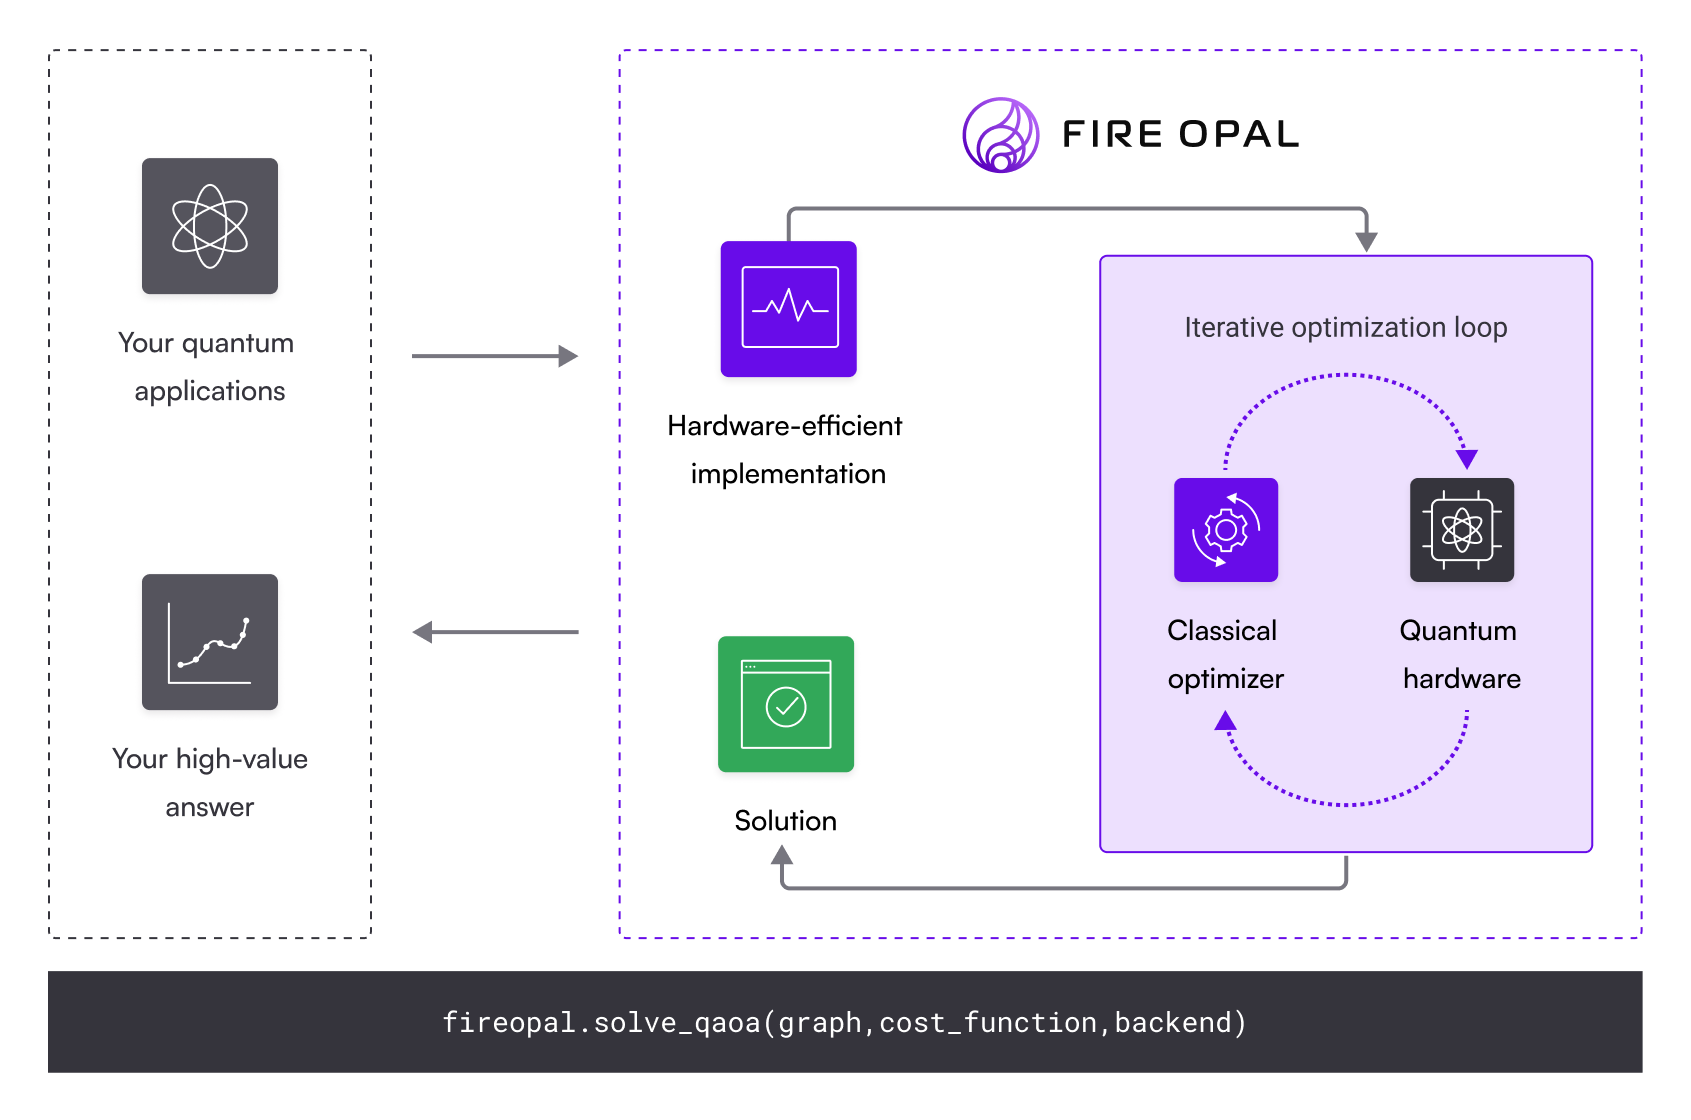 A graphic of how Q-CTRL's Fire Opal works to find innovative solutions. 